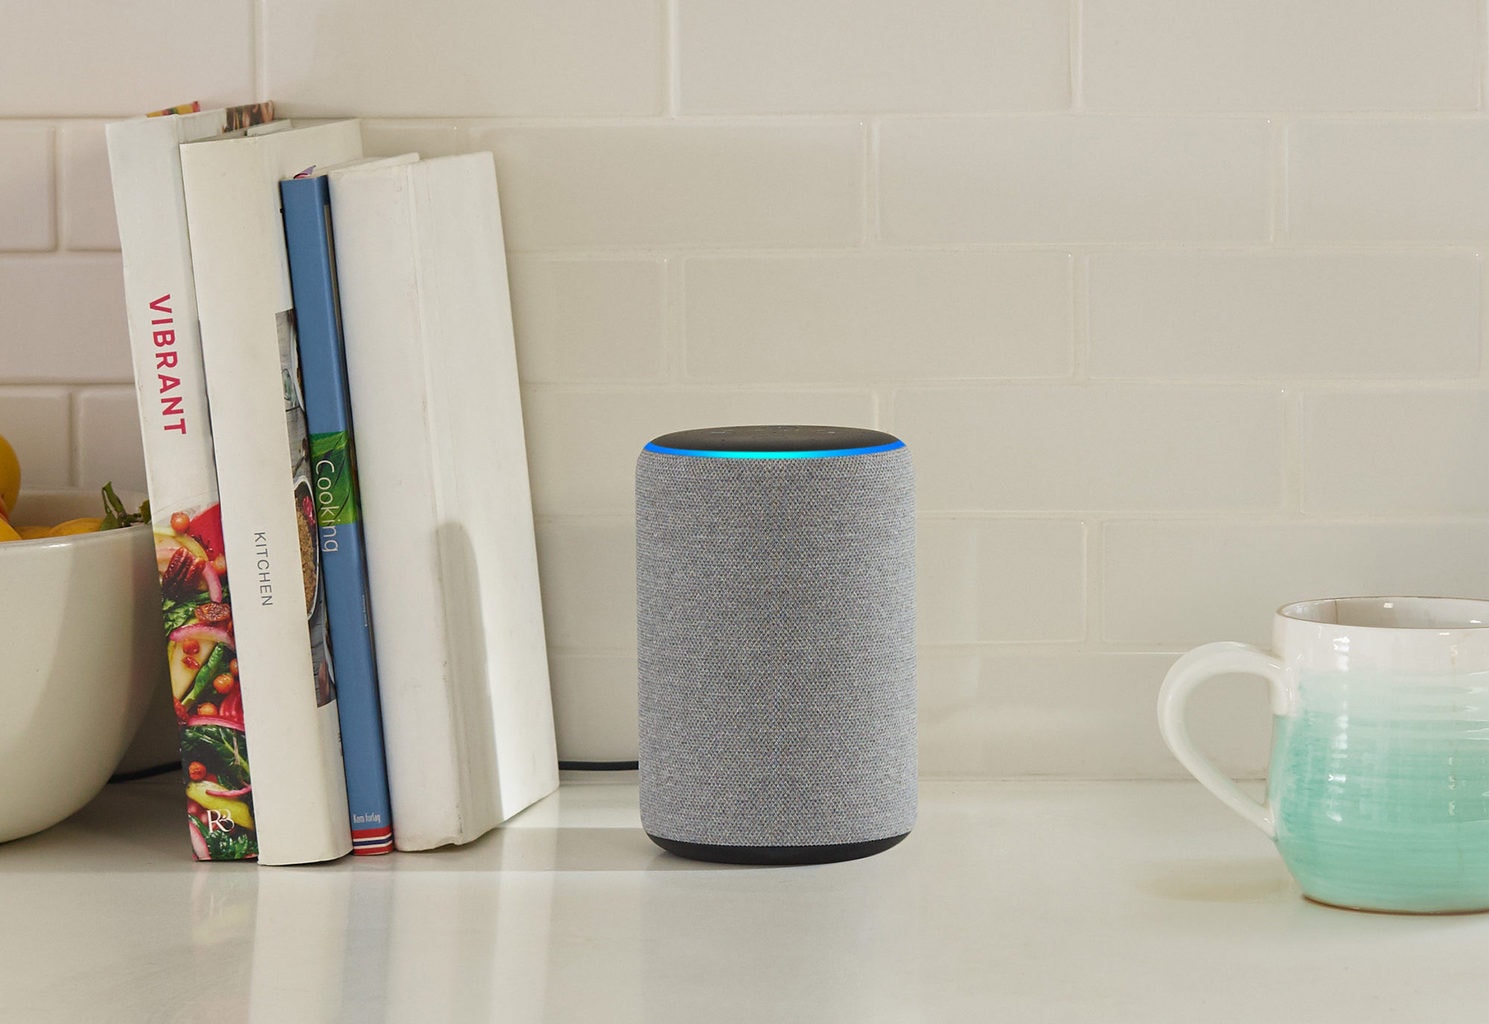 amazon echo connect to bluetooth